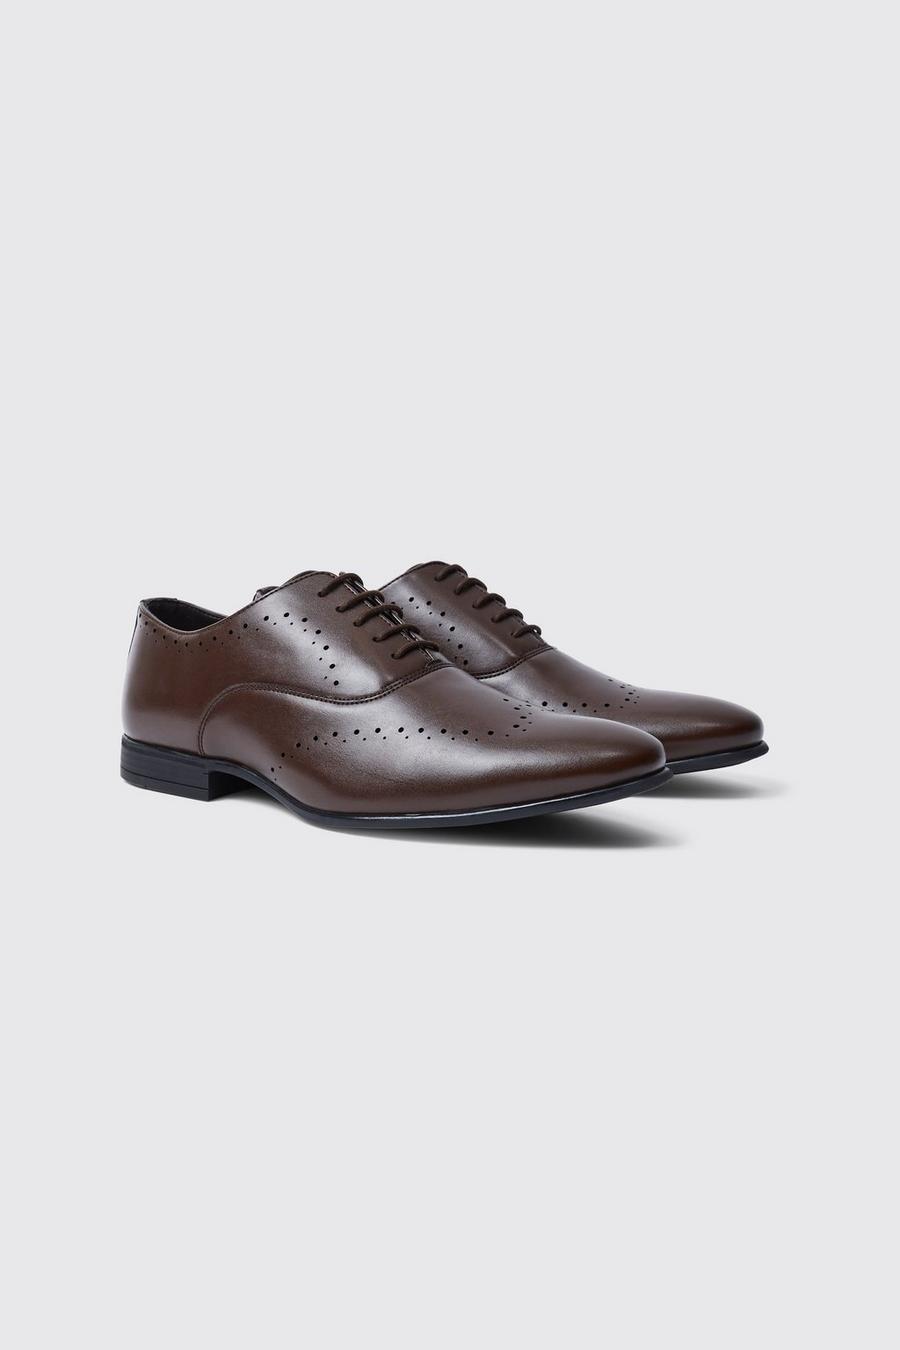 Chocolate marron Perforated Detail Smart Derby Shoe